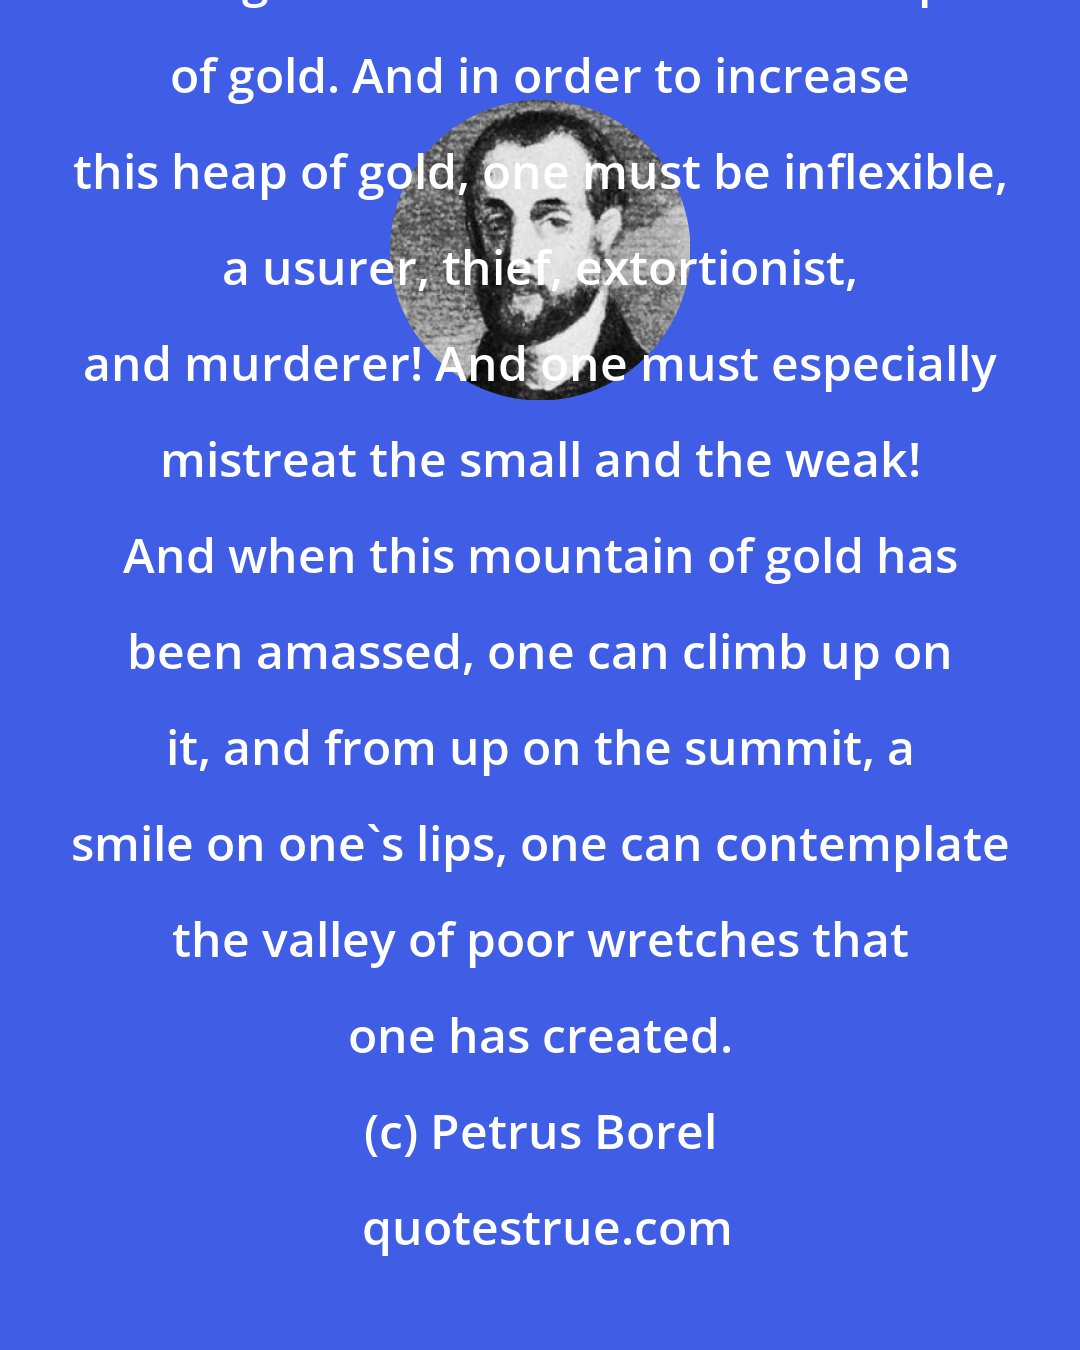 Petrus Borel: To get rich, one must have but a single idea, one fixed, hard, immutable thought: the desire to make a heap of gold. And in order to increase this heap of gold, one must be inflexible, a usurer, thief, extortionist, and murderer! And one must especially mistreat the small and the weak! And when this mountain of gold has been amassed, one can climb up on it, and from up on the summit, a smile on one's lips, one can contemplate the valley of poor wretches that one has created.